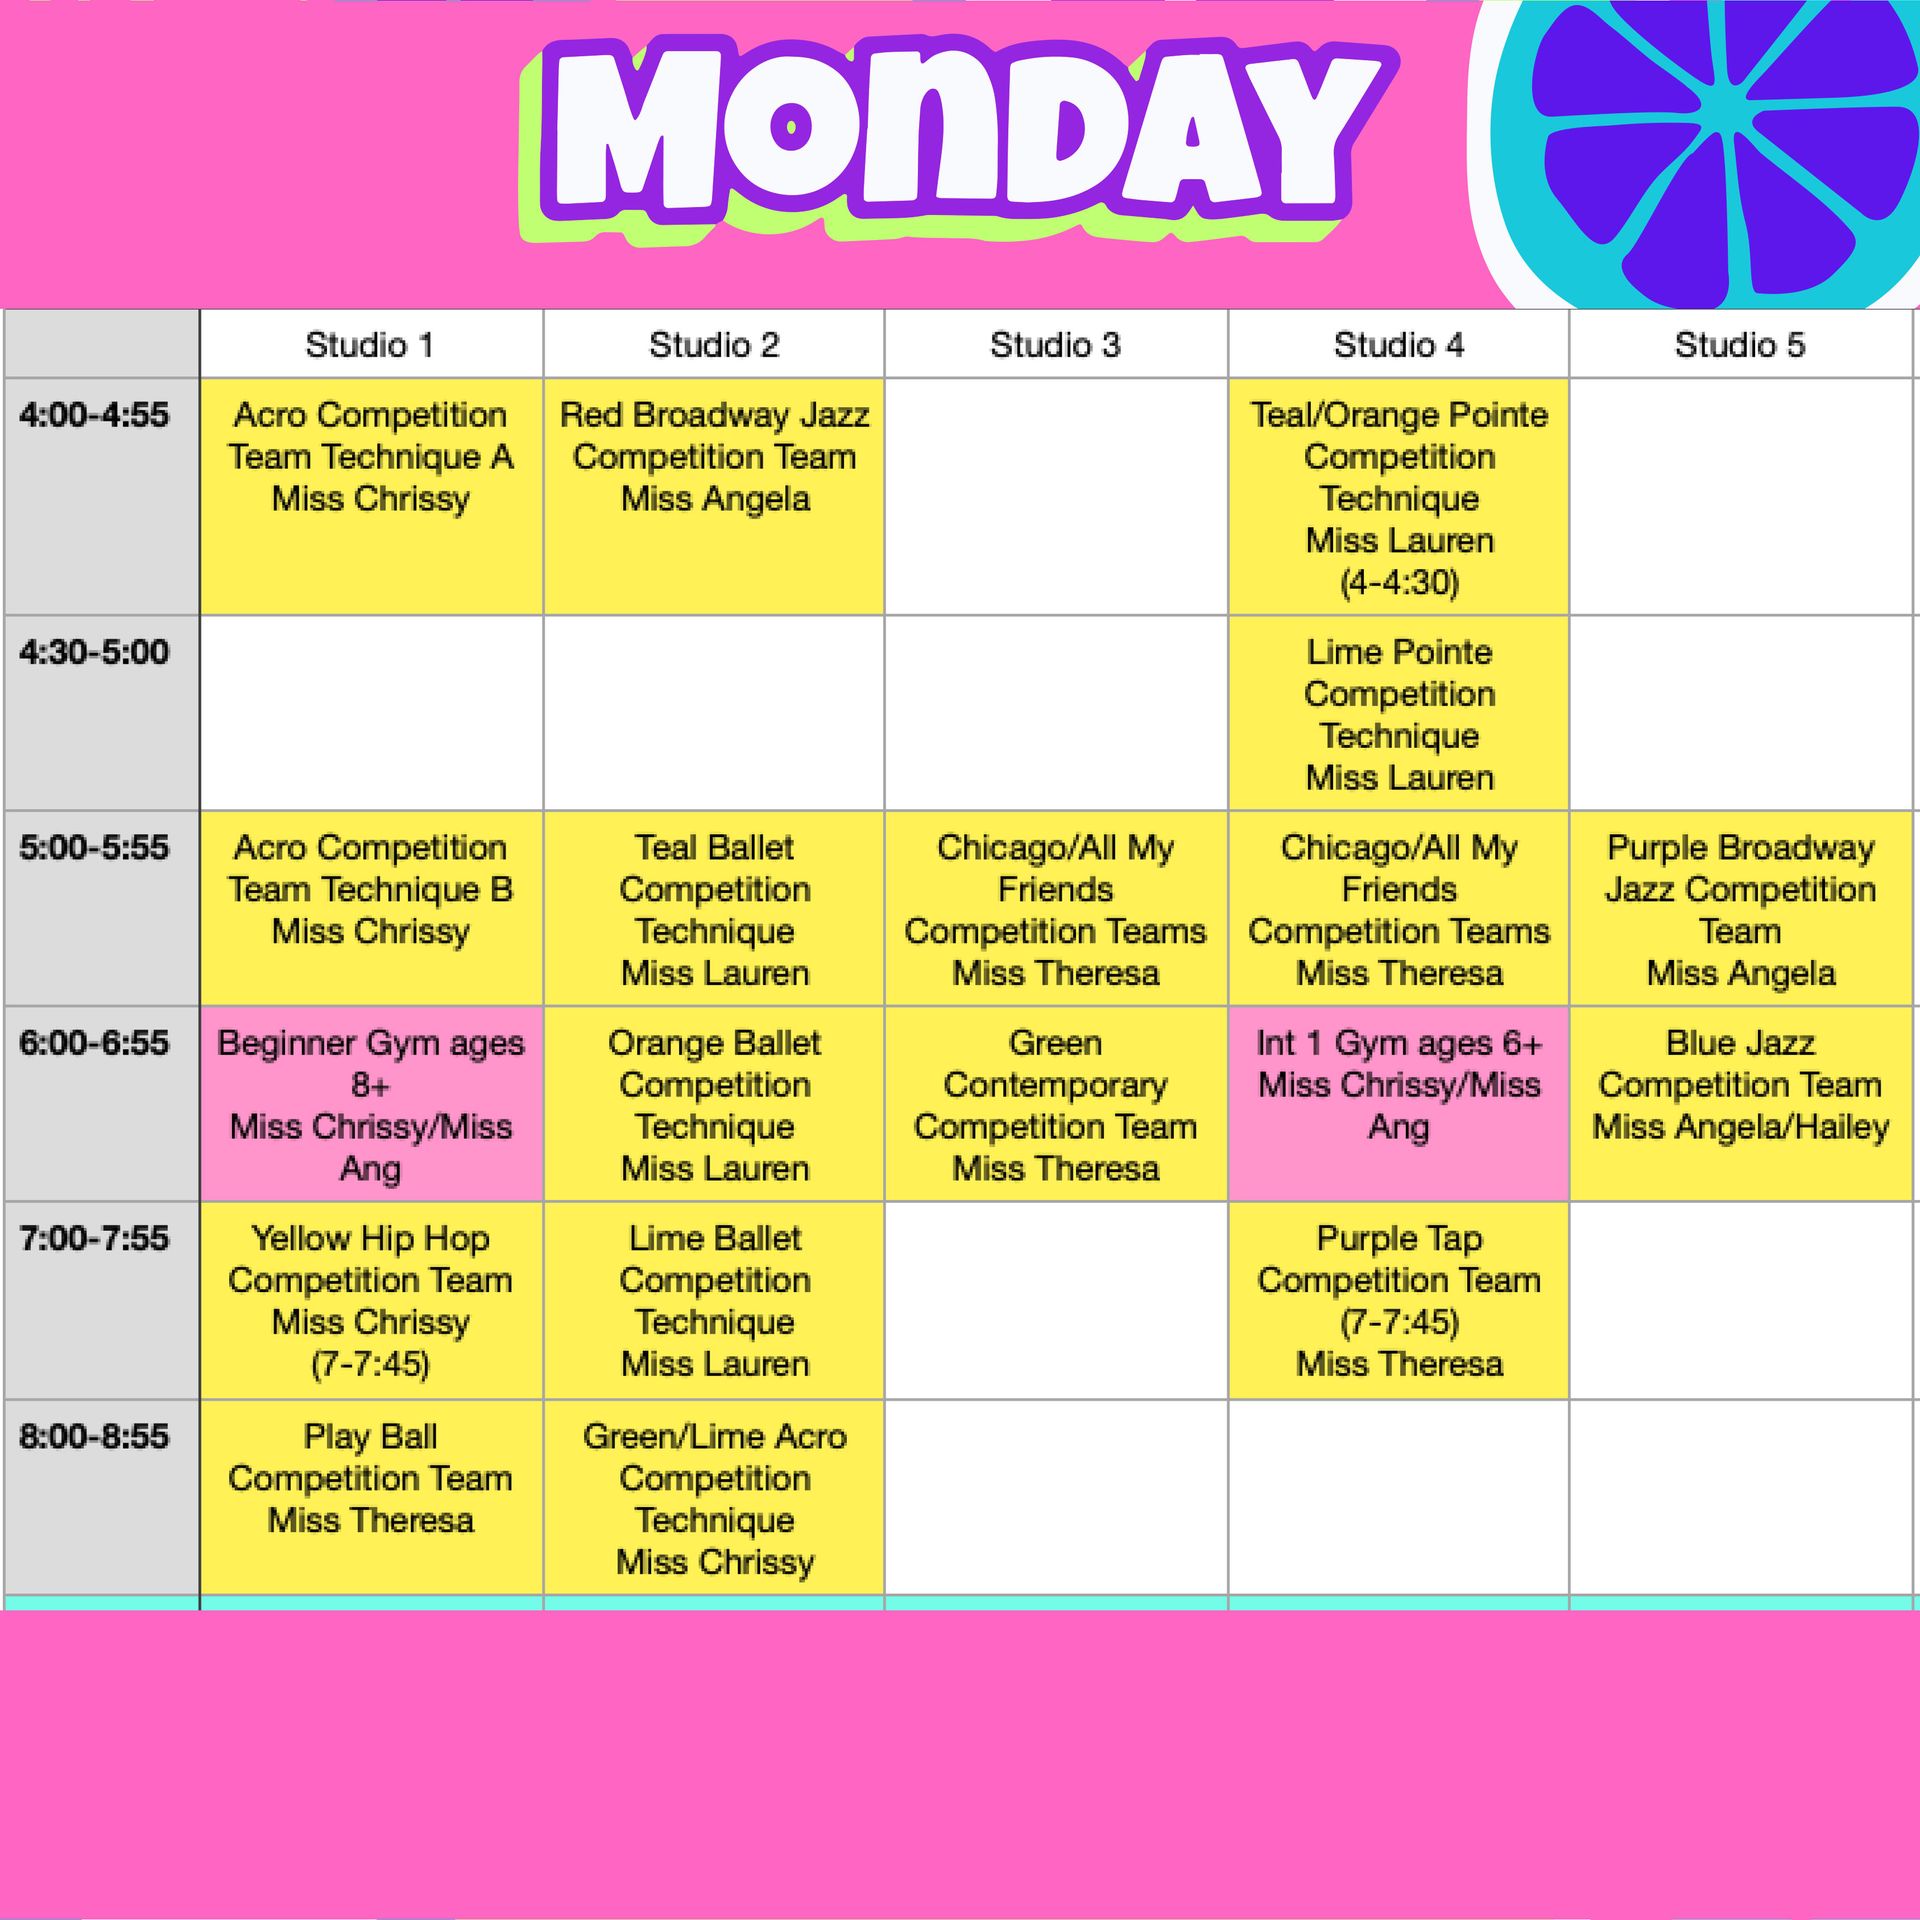 A Monday schedule for a dance studio